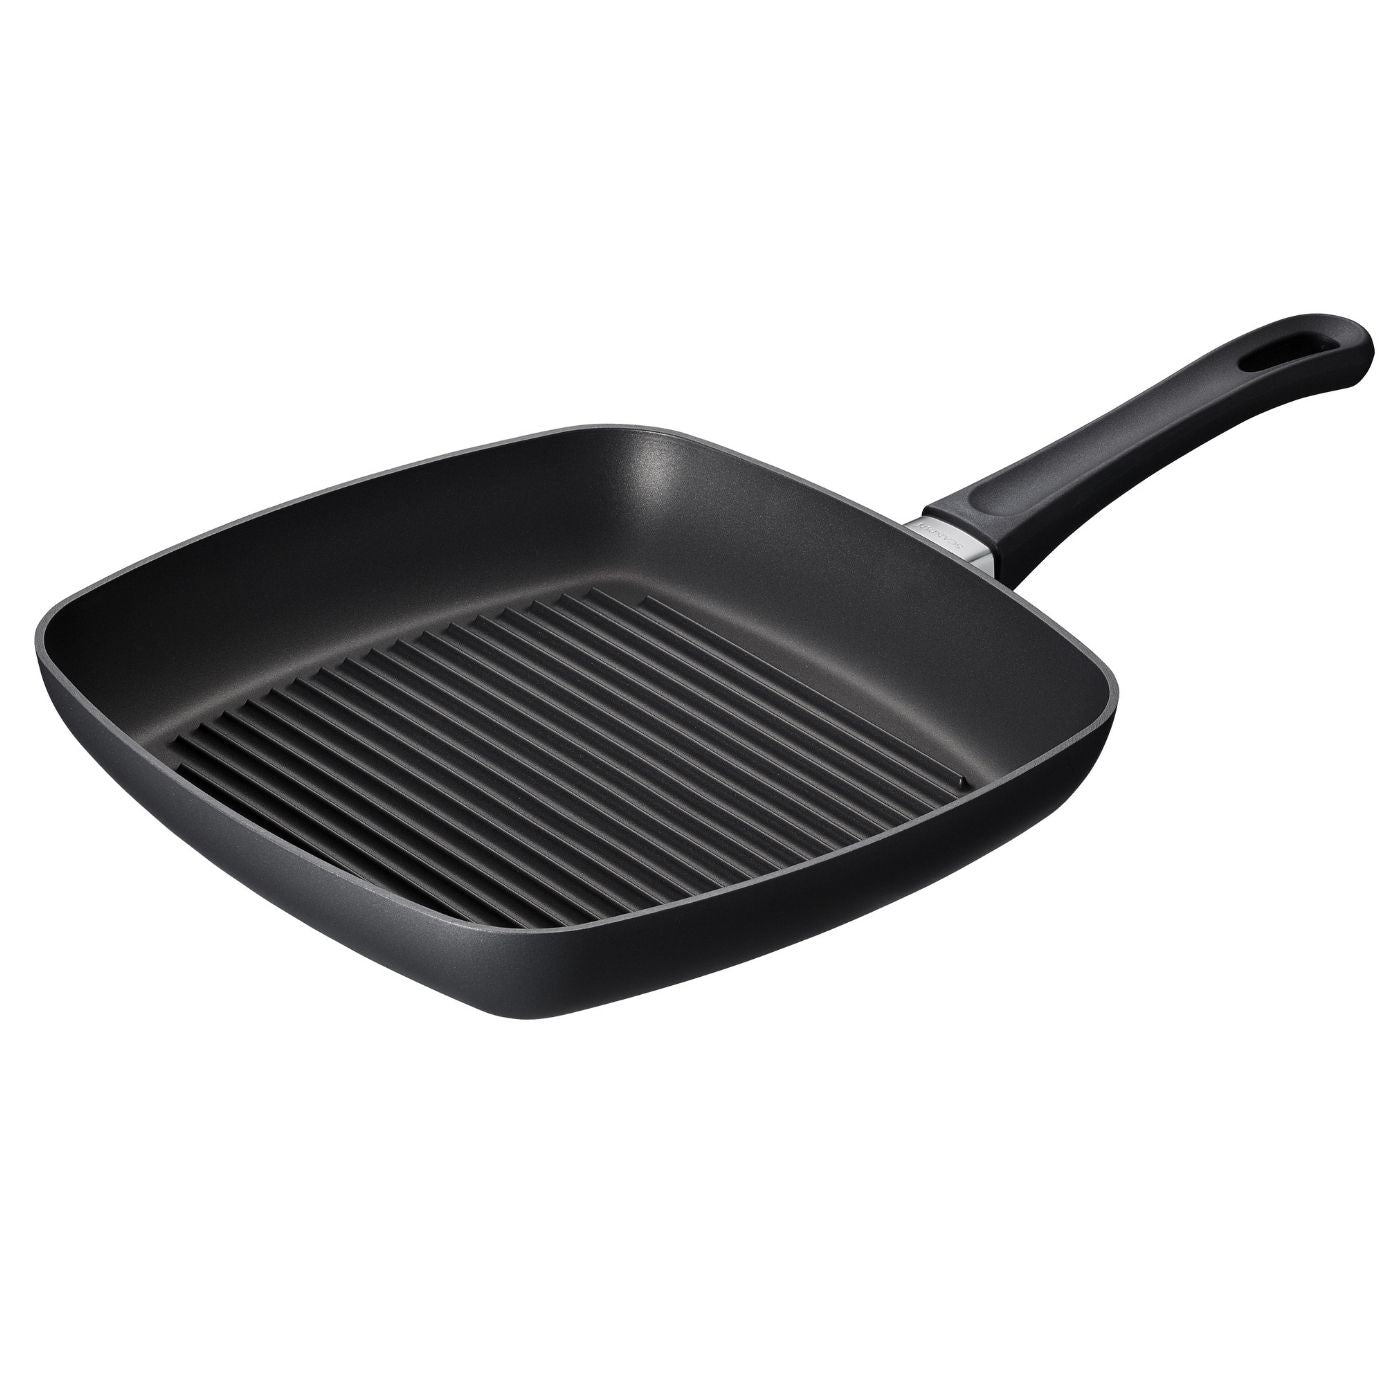 Scanpan Non Stick Classic Induction Sqaure Grill Pan 27cm